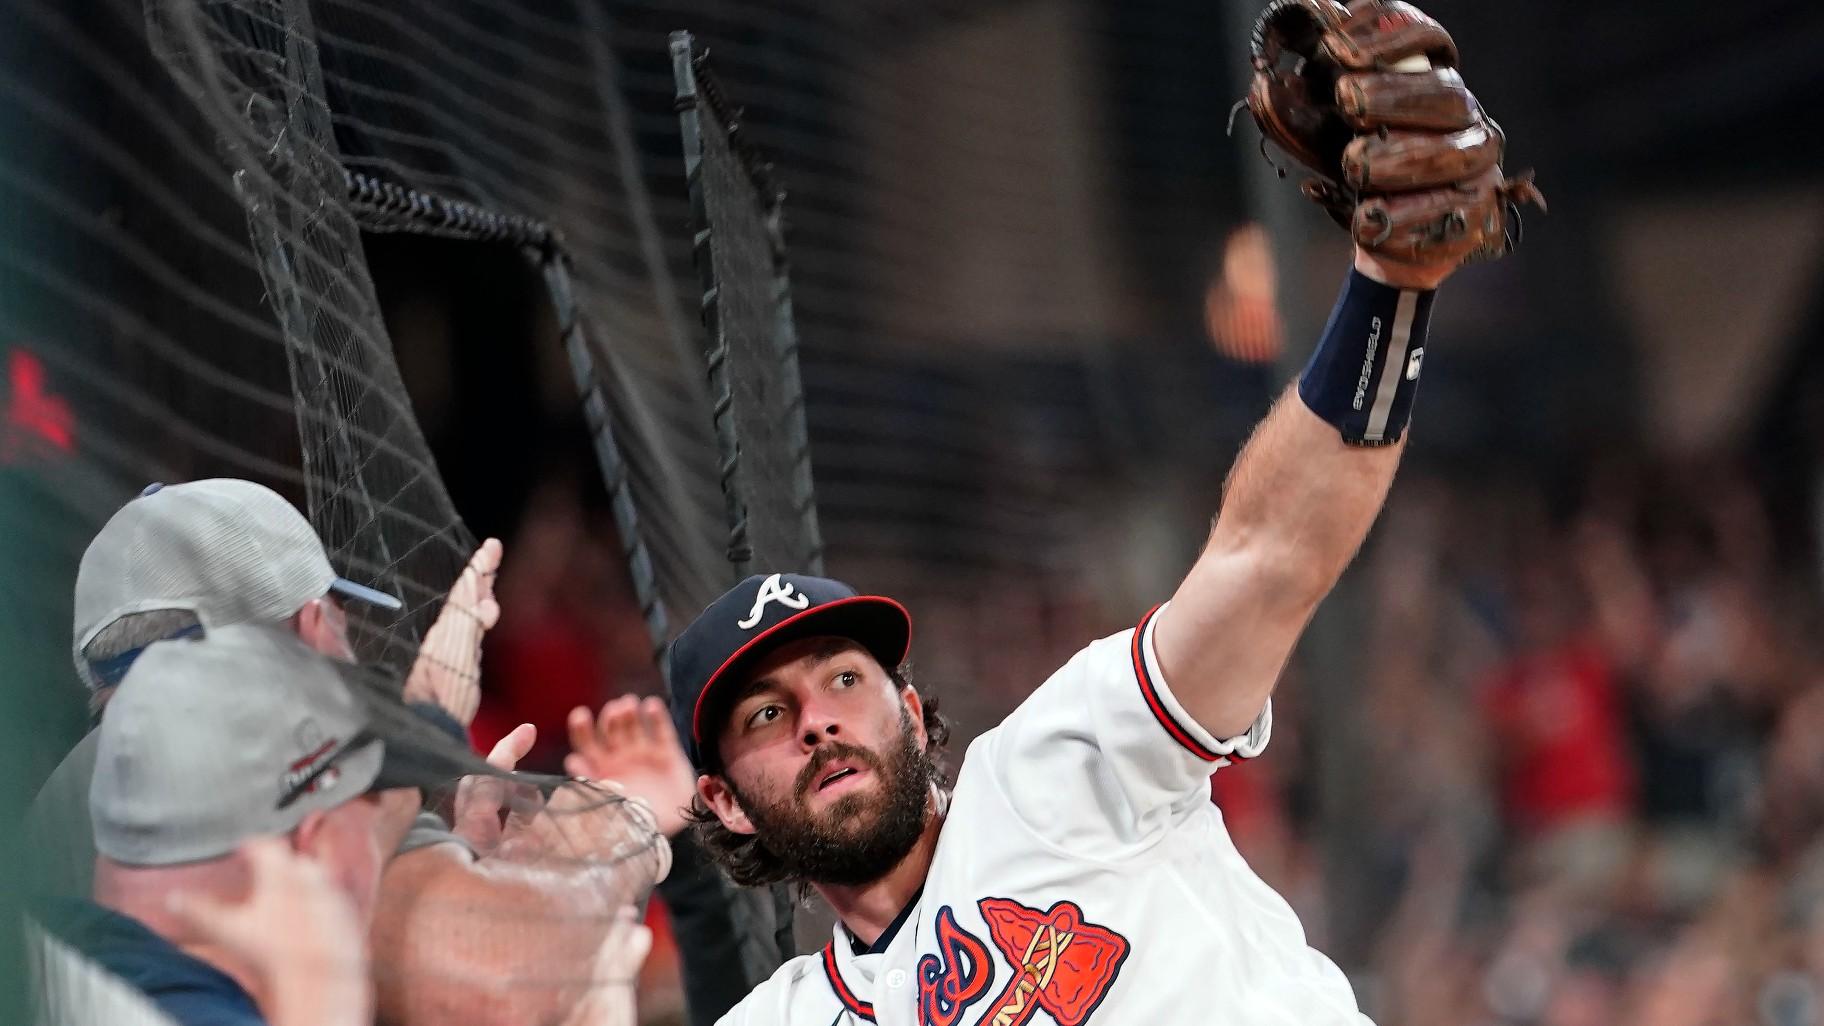 Dansby Swanson catches a ball hit by Philadelphia Phillies’ Kyle Schwarber in the ninth inning of a baseball game Sept. 17, 2022, in Atlanta. (AP Photo / Brynn Anderson, File)